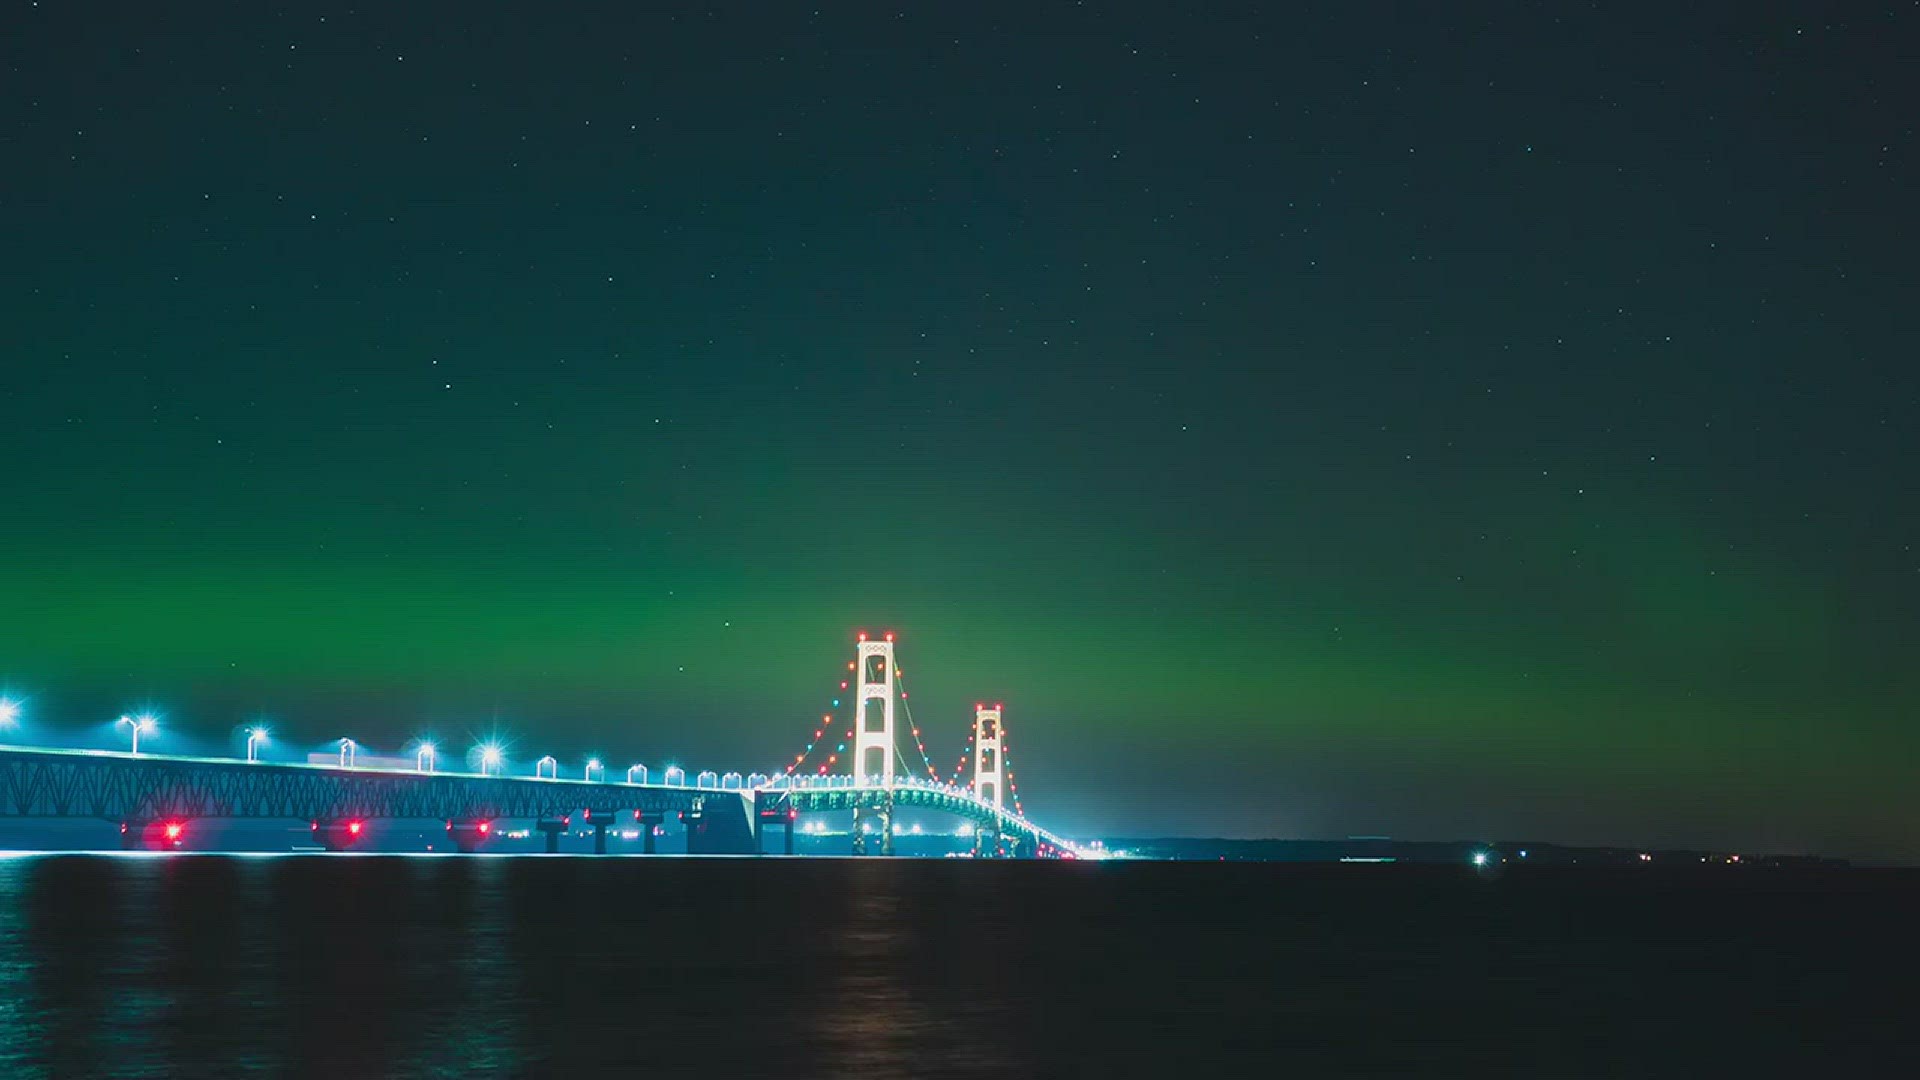 Dustin Dilworth of D3 Imagery captured this stunning look at the auroras - also known as the northern lights - over the Mackinac Bridge between 2:30 and 3:15 a.m. Monday, July 17, 2017.